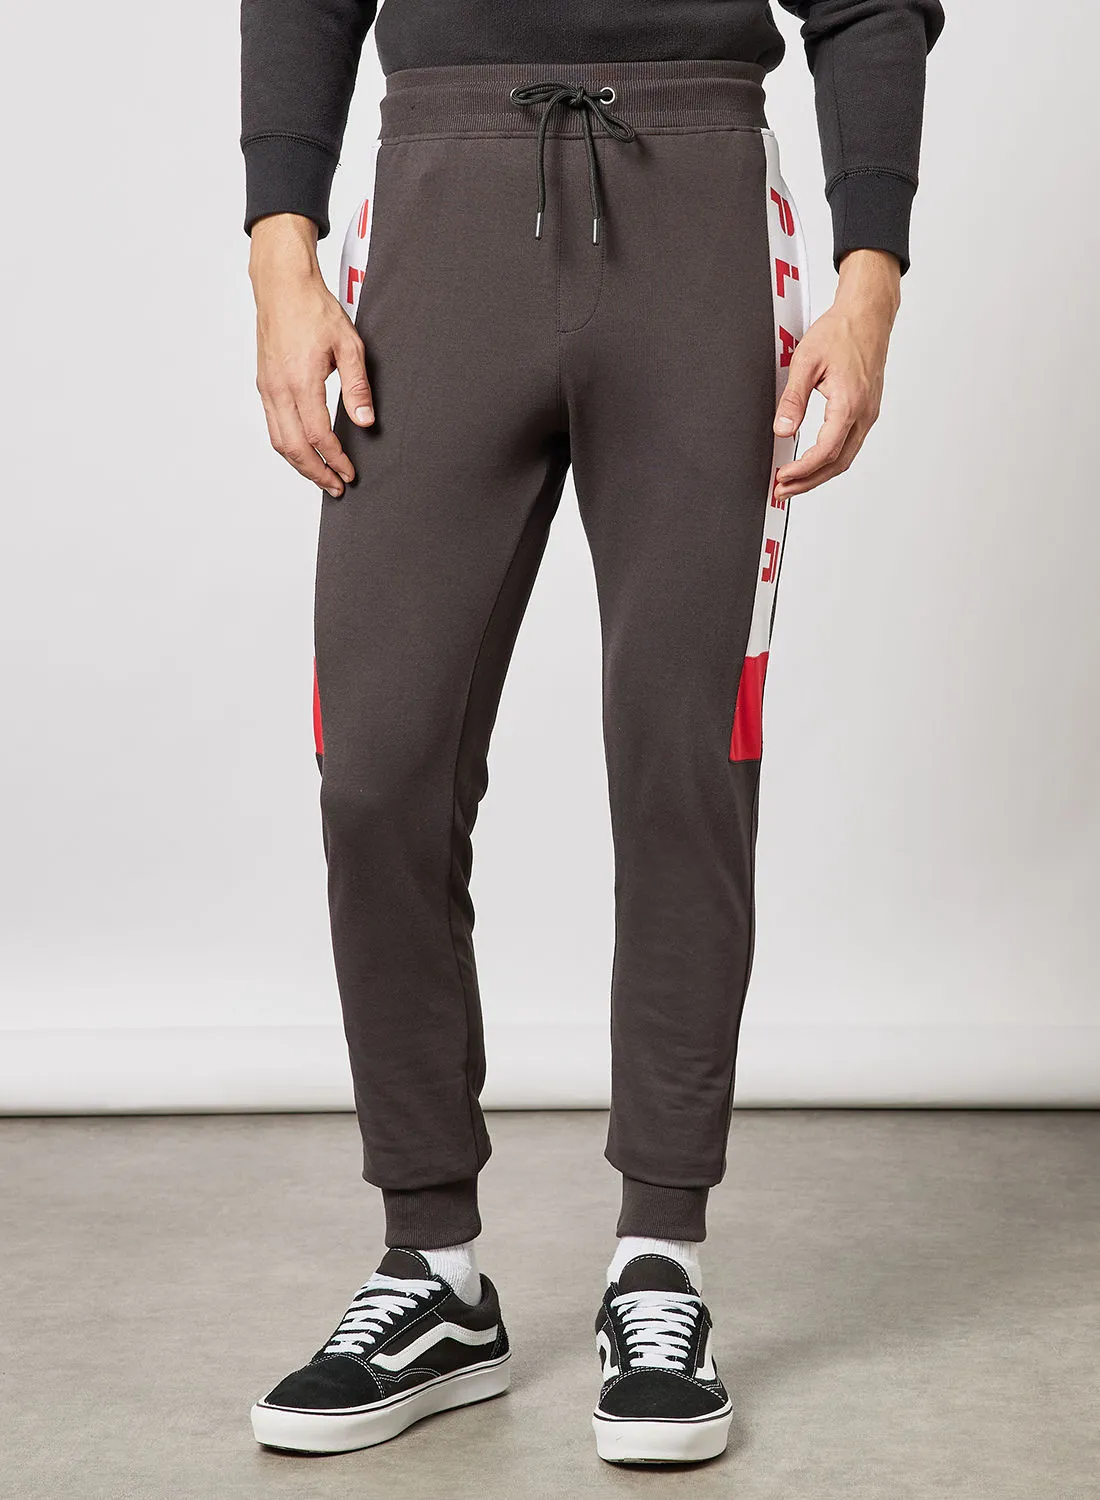 ABOF Regular Fit Joggers Brown/White